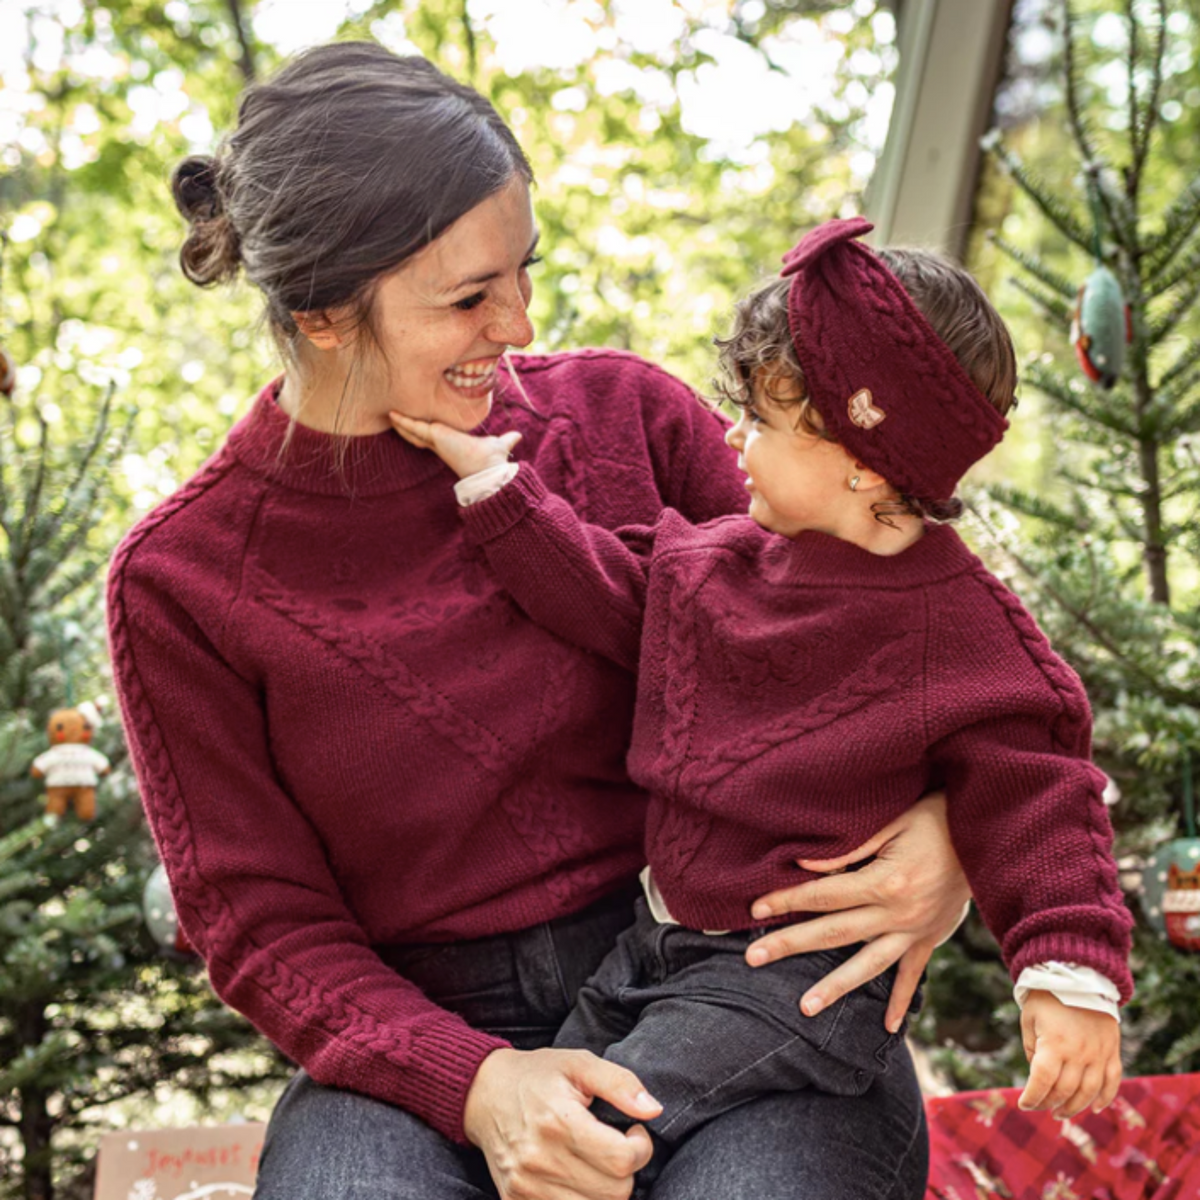 Long Sleeve Burgundy Sweater with Embroideries and Braided Pattern, Baby